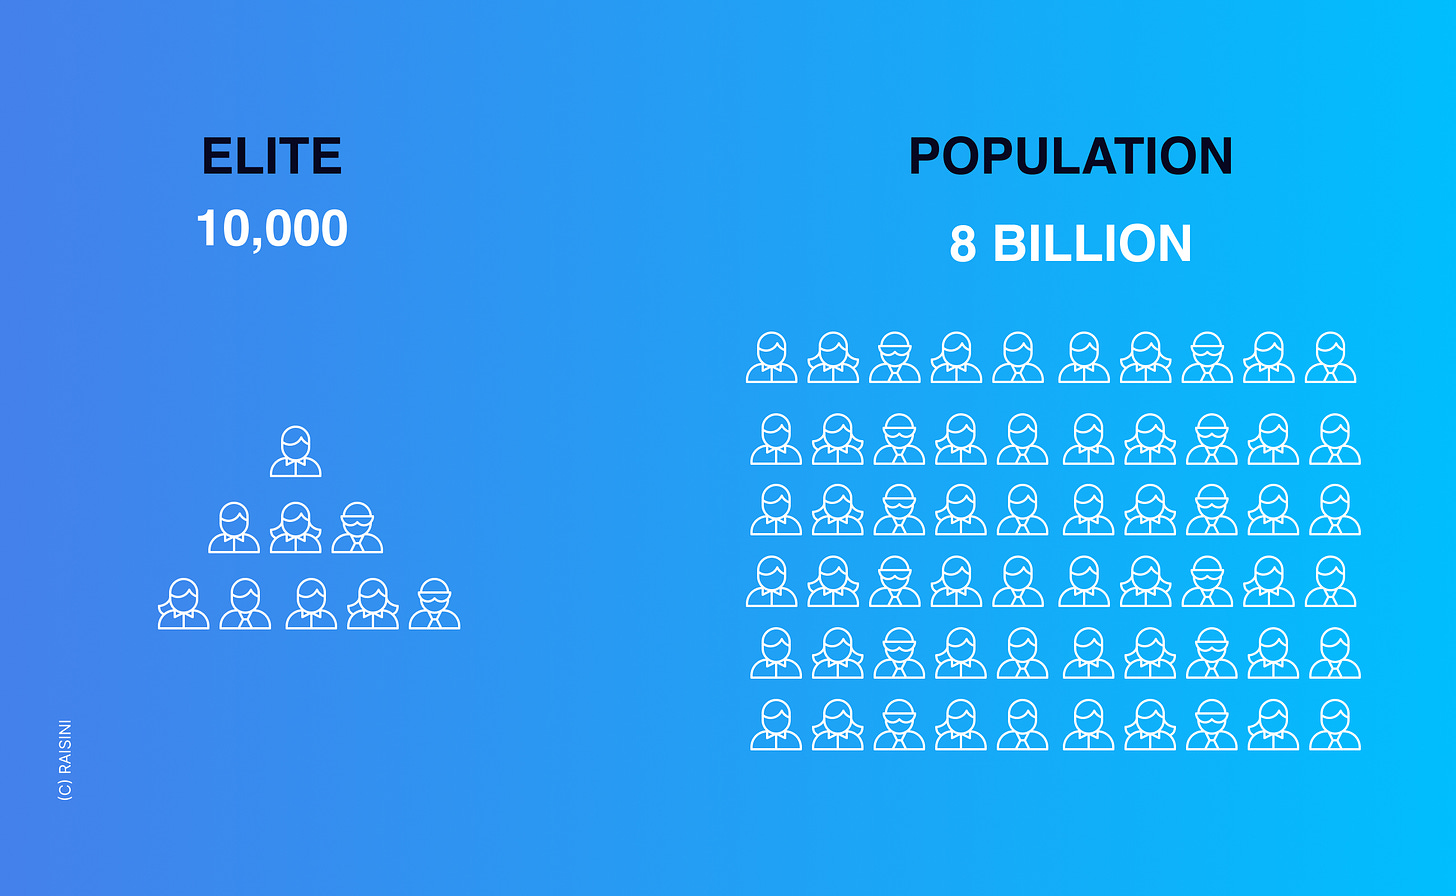 graphic showing a small group of people vs the population